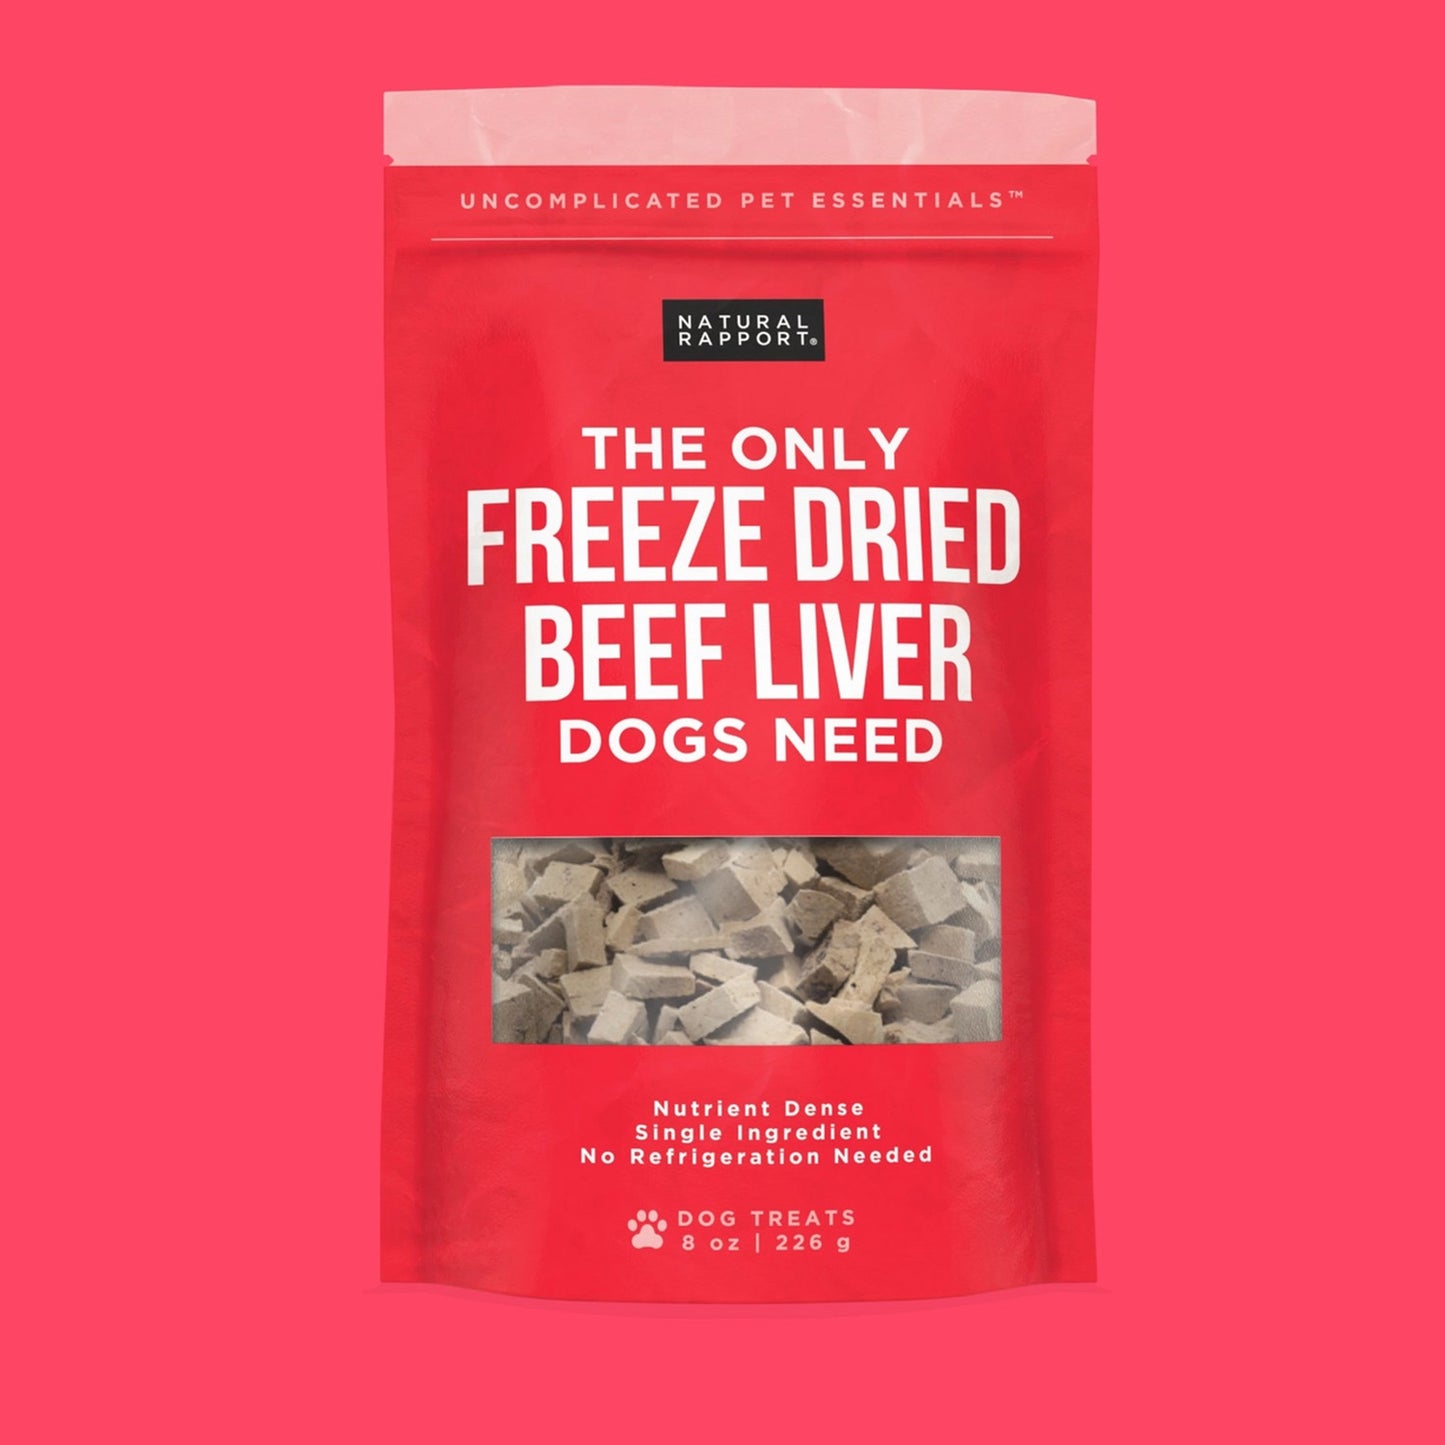 Only Freeze Dried Beef Liver Dogs Need